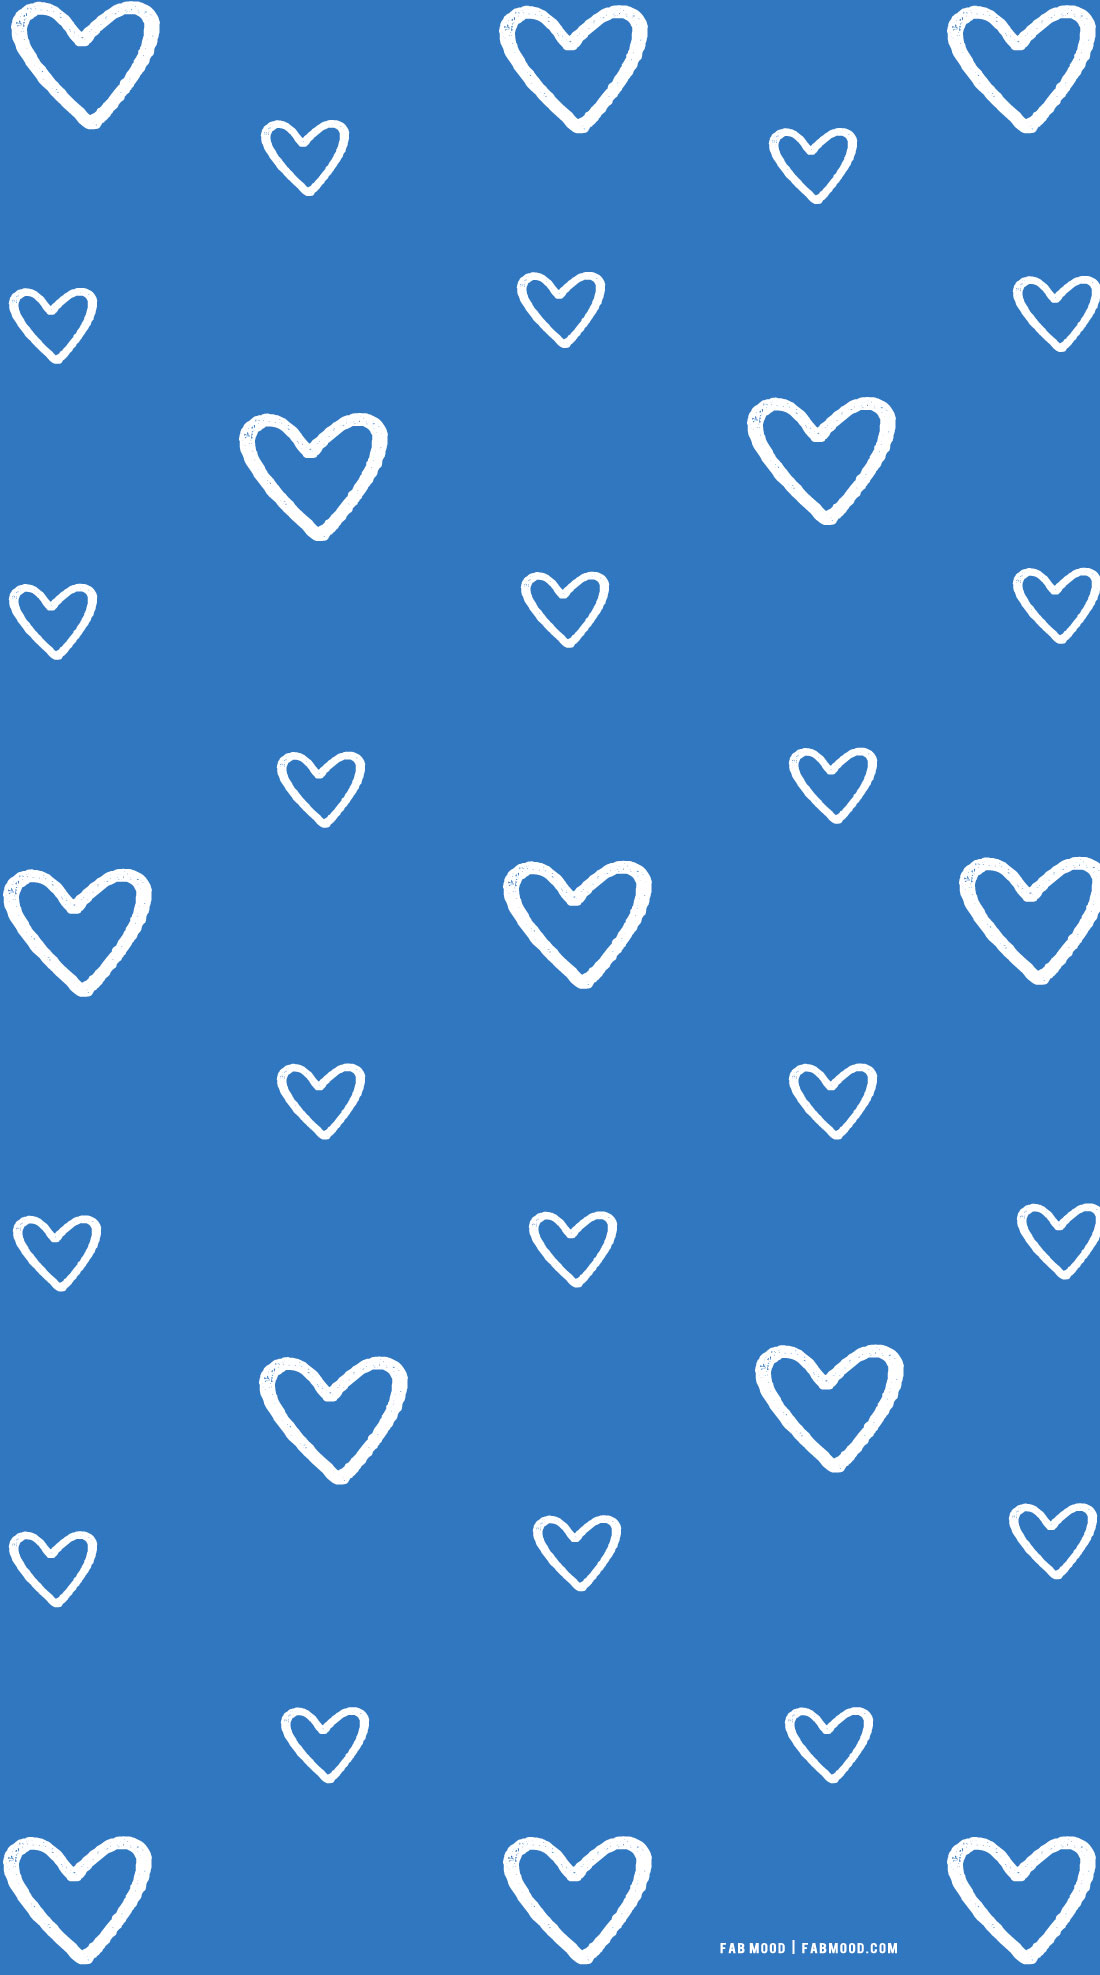 love is blue, what color is your love, azure blue color, azure blue wallpaper, azure blue background, heart illustration azure blue wallpaper, azure color, azure blue, cute wallpaper, blue wallpaper iphone